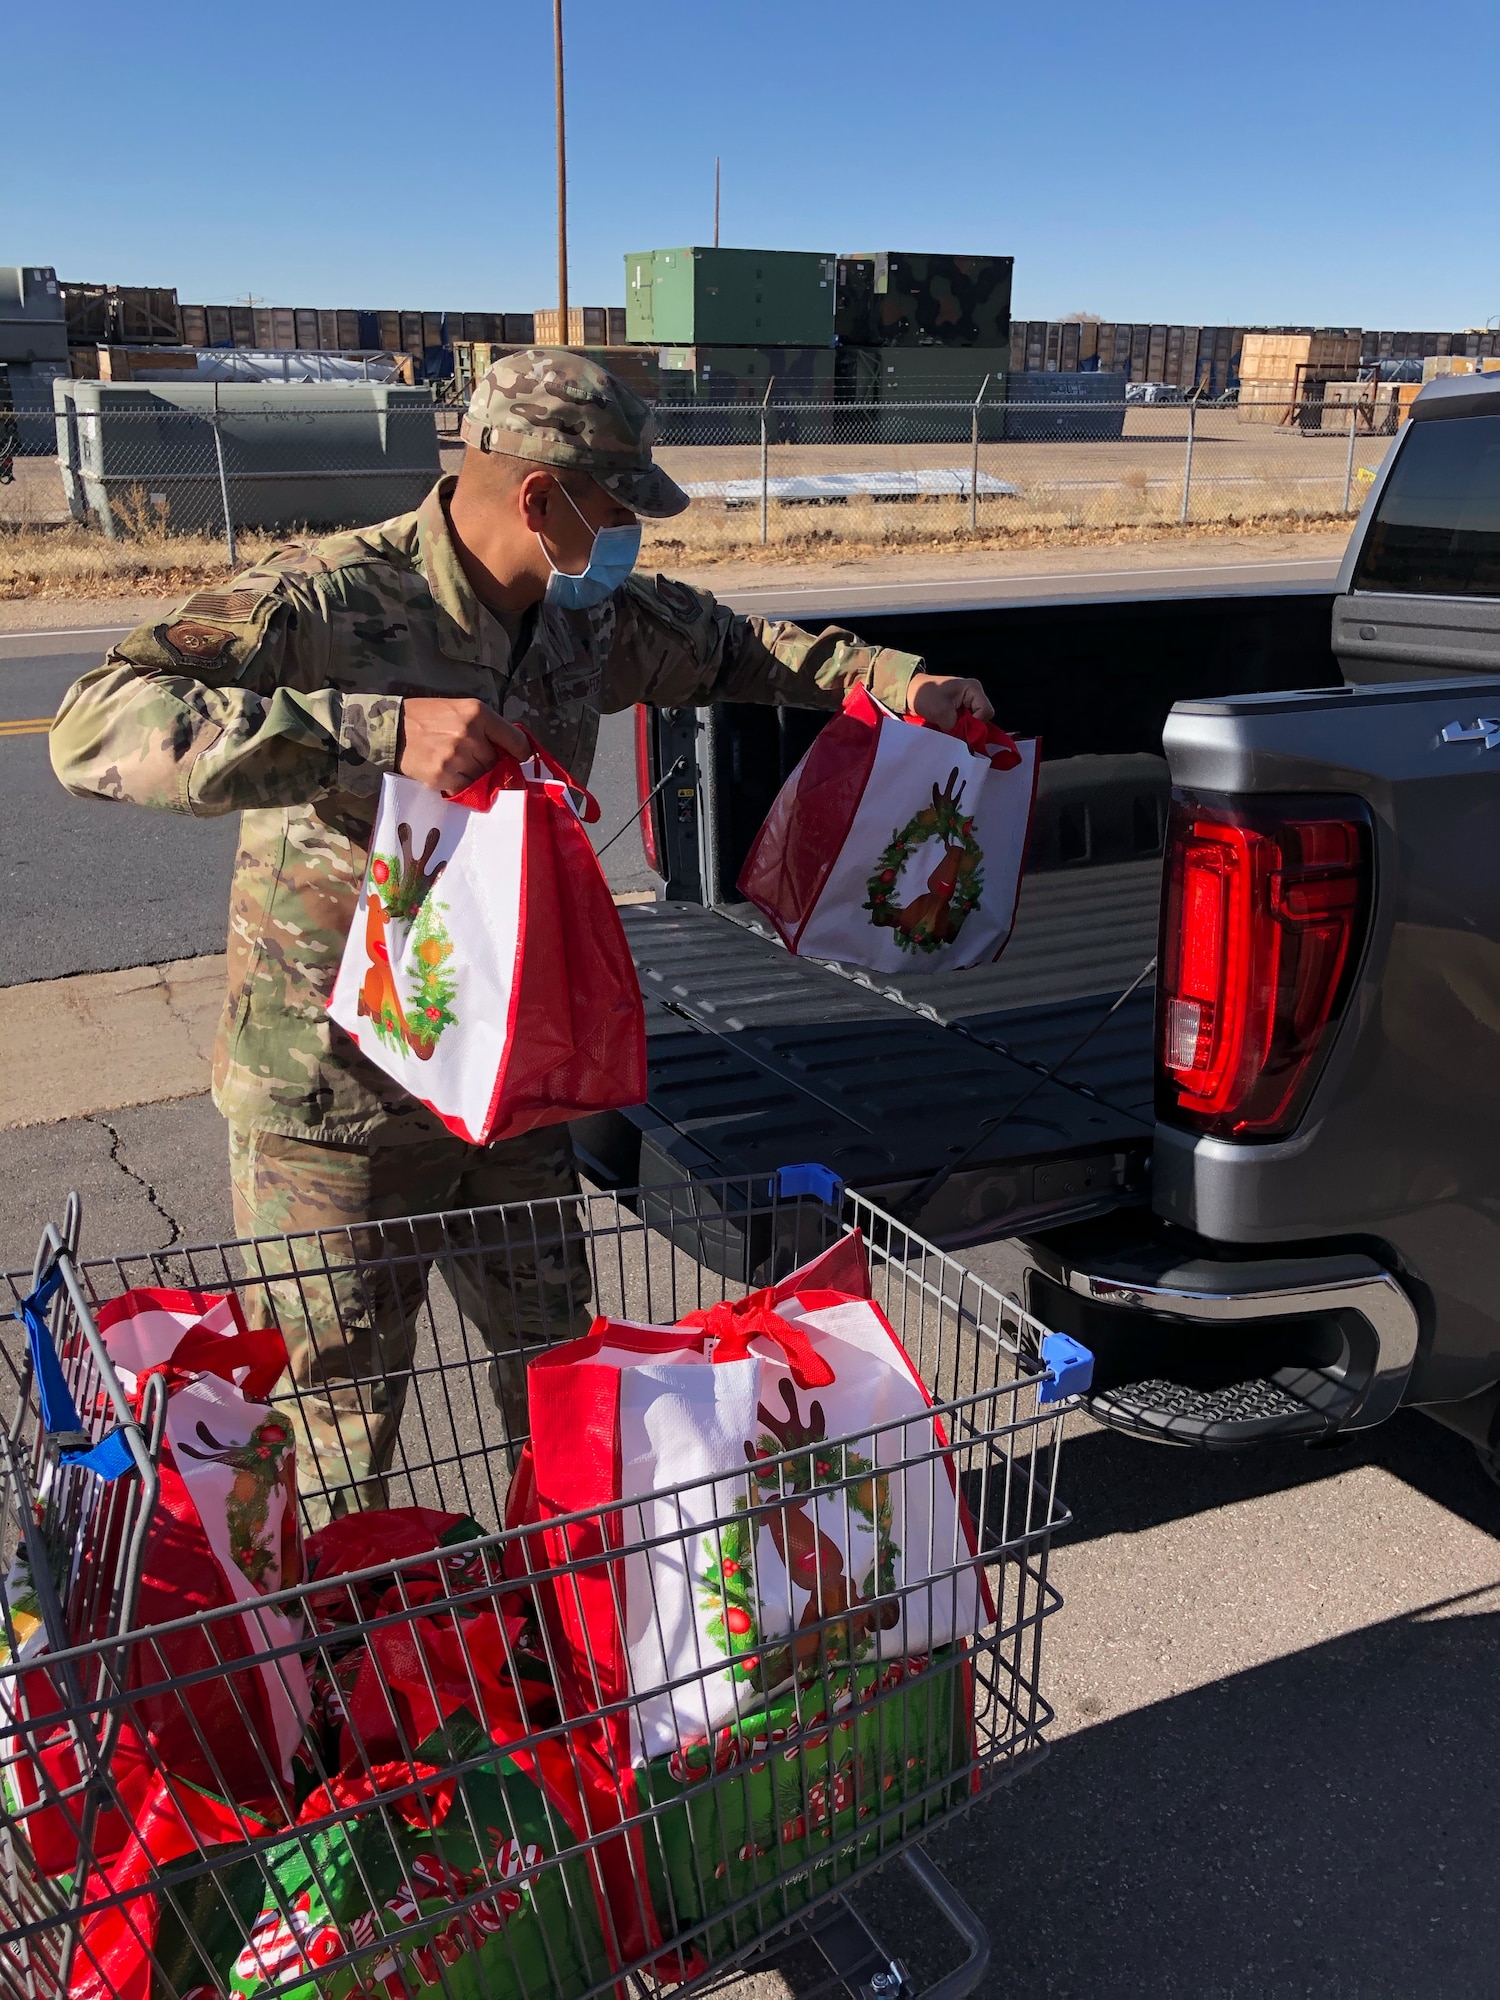 Senior Master Sgt. Jason Delacruz, 75th Medical Group first sergeant, loads bags filled with Thanksgiving food items into the bed of a truck Nov. 20, 2020, at Hill Air Force Base, Utah. Operation Warm Heart, a first sergeant’s program, teamed with the commissary to deliver bags filled with turkeys, hams and other goods to assist Airmen and their families with the upcoming holiday. (Courtesy photo)